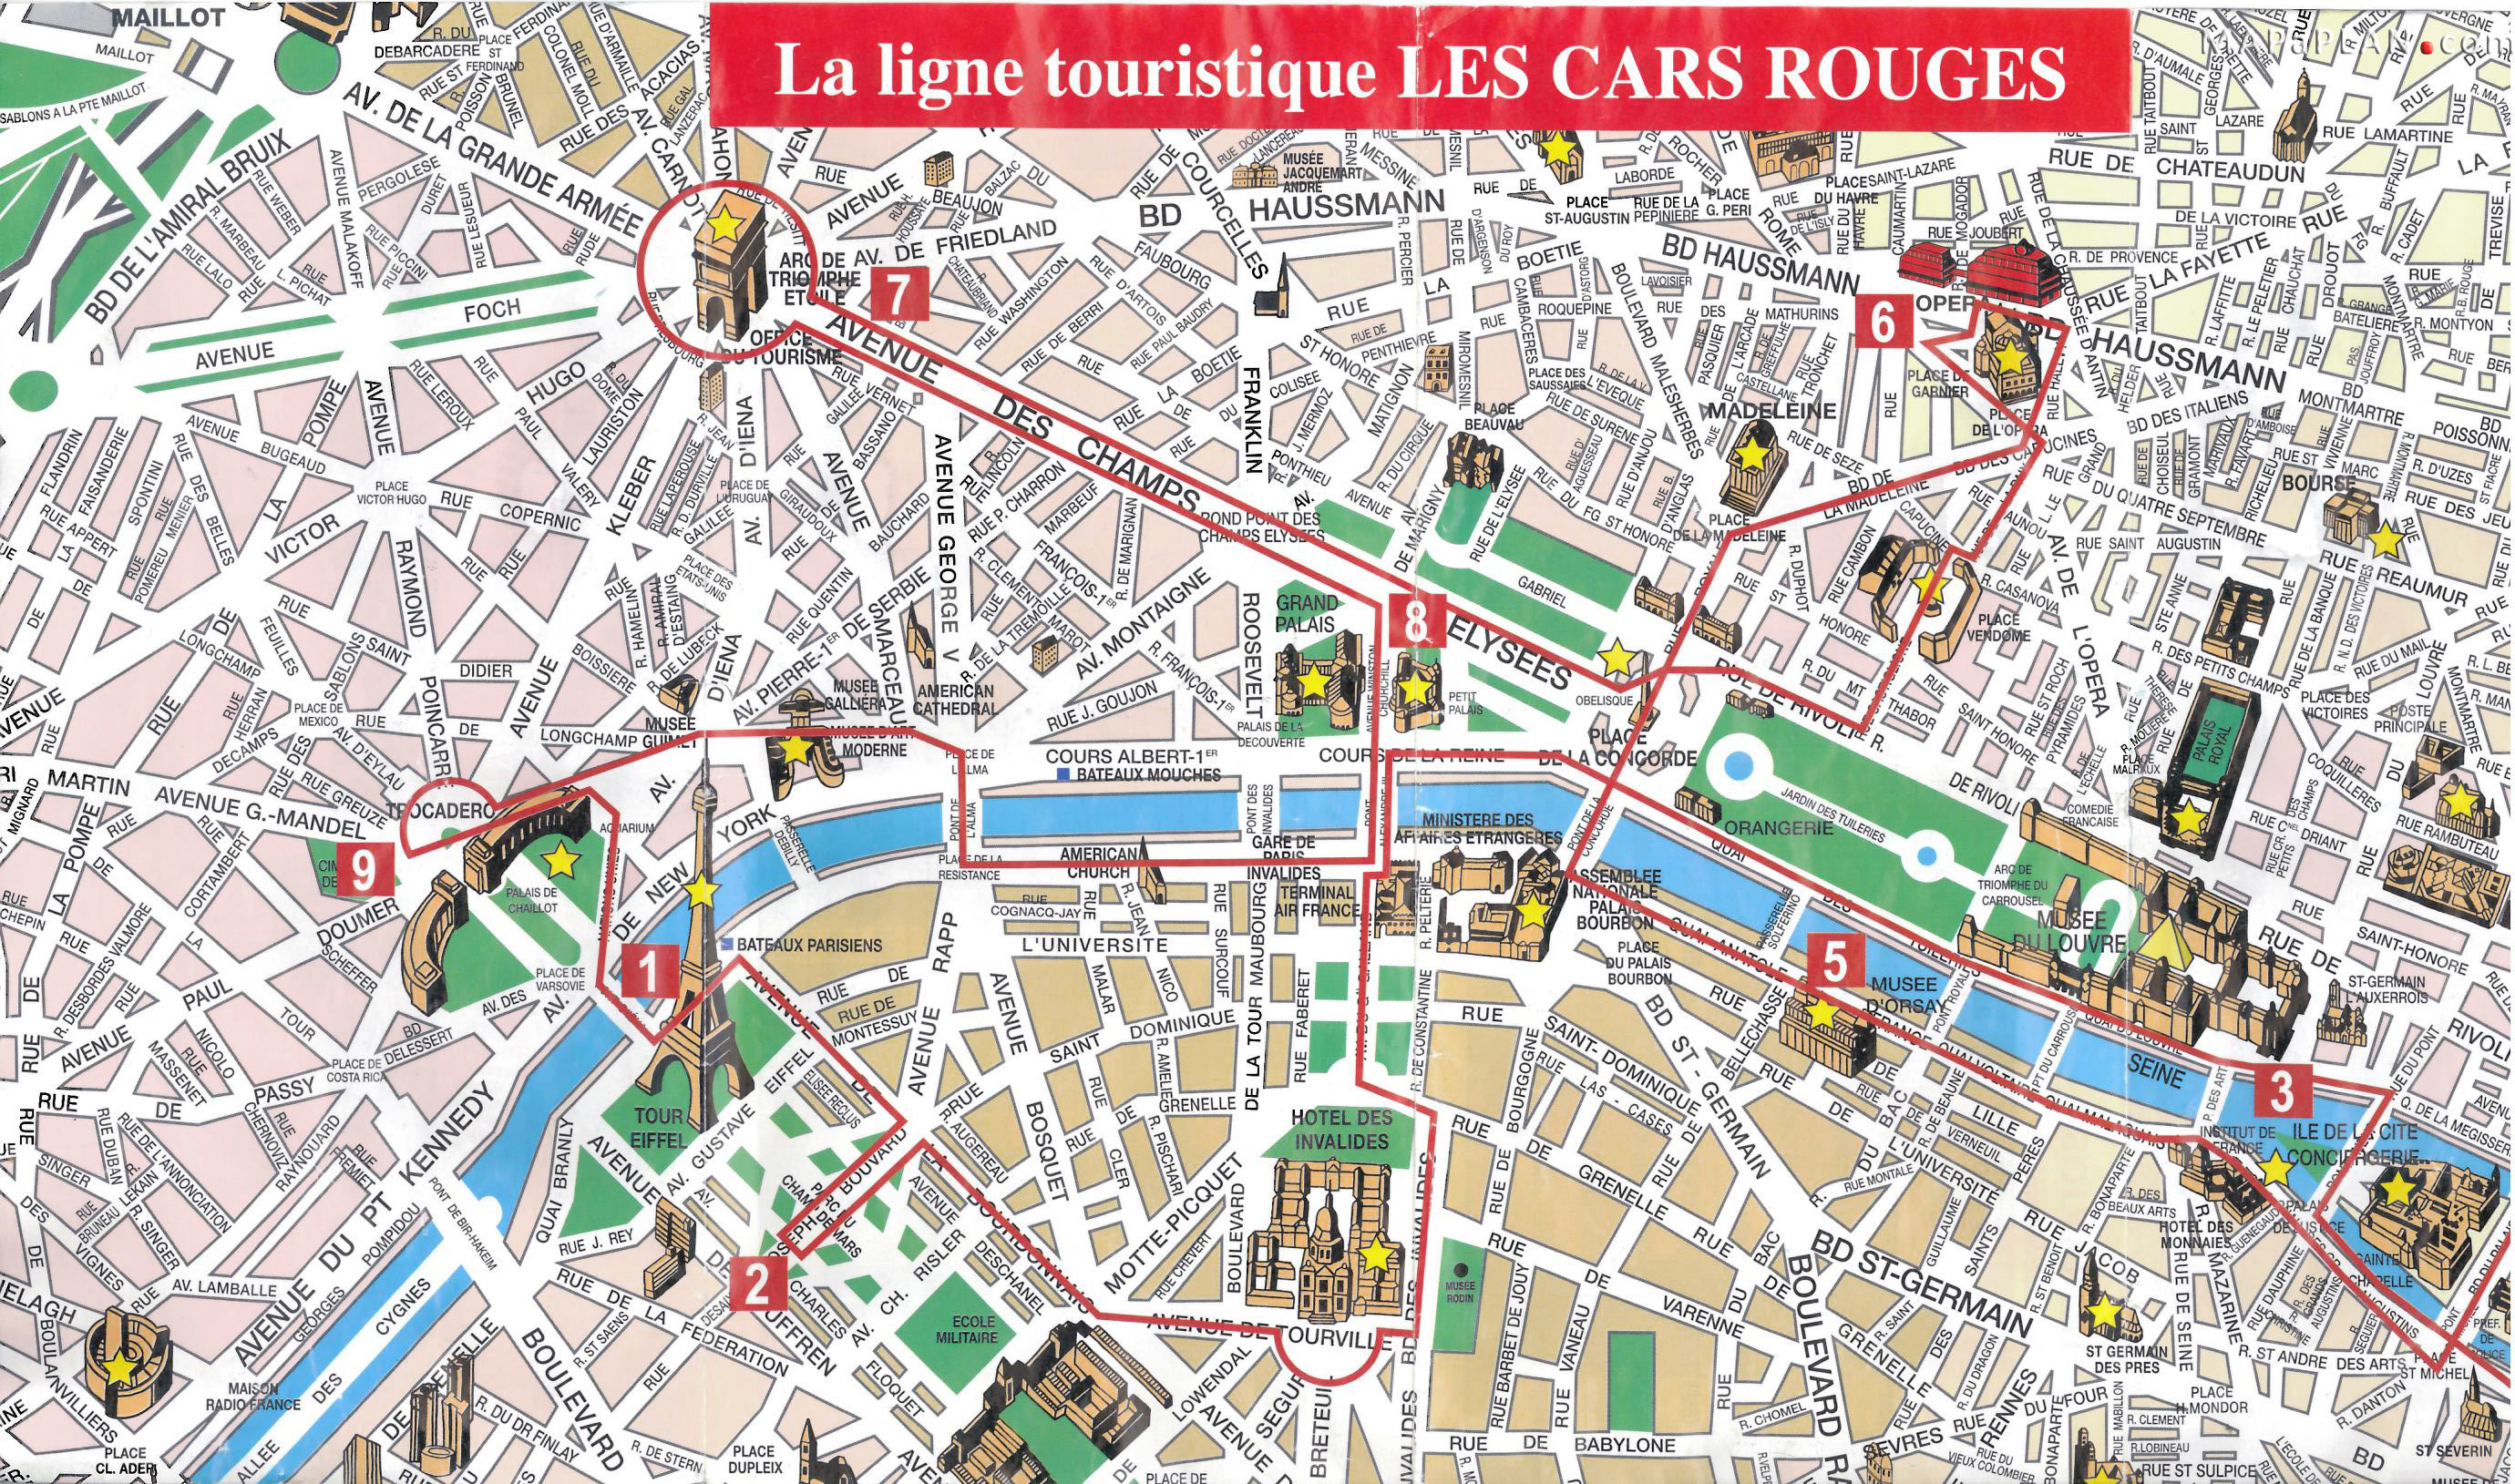 Paris top tourist attractions map City sightseeting route planner